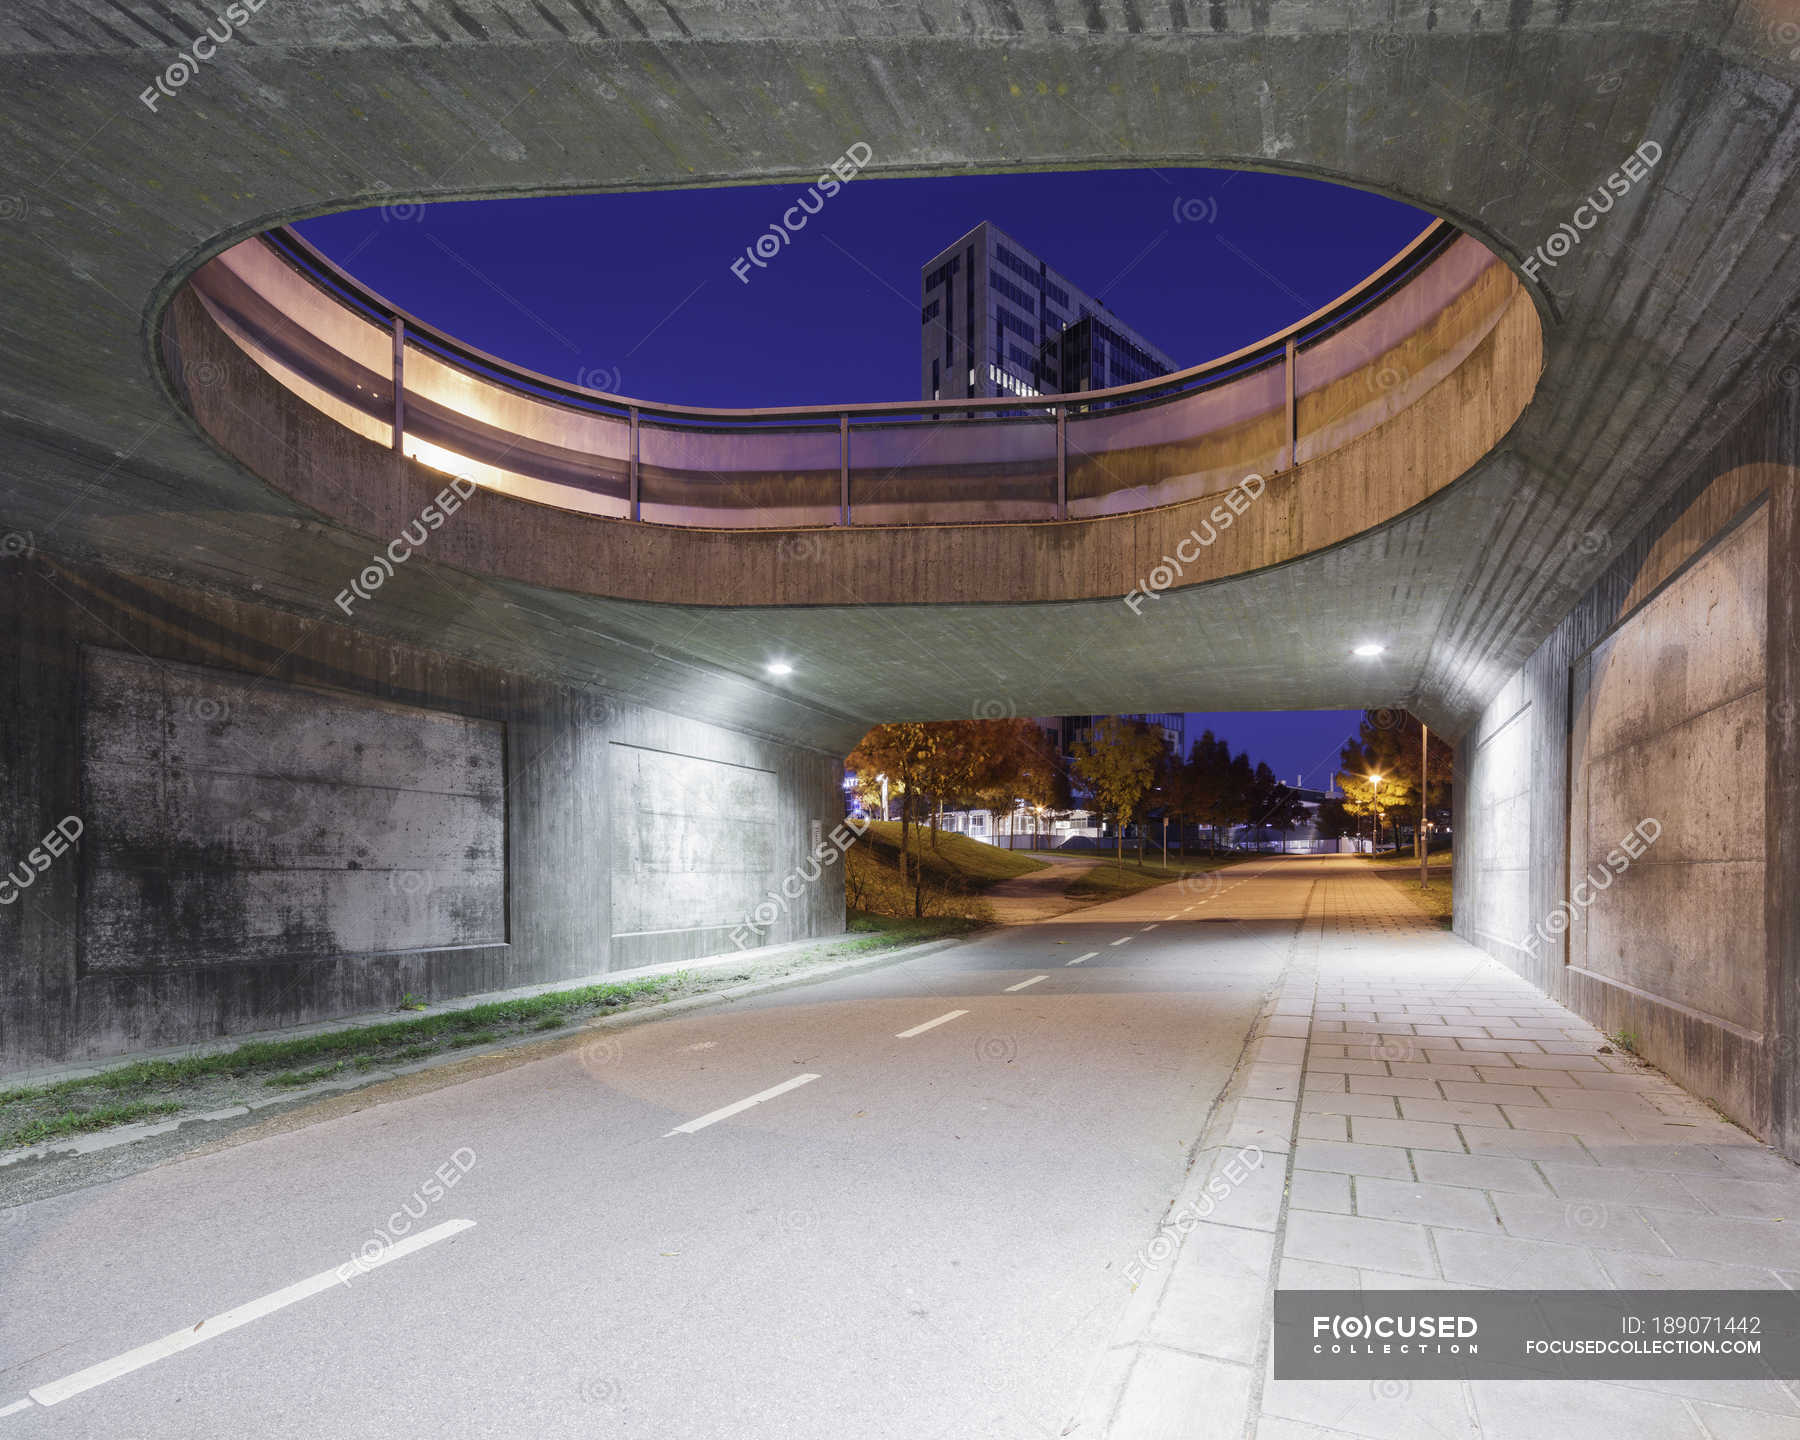 Road under bridge with buildings in background — outdoors, horizontal -  Stock Photo | #189071442